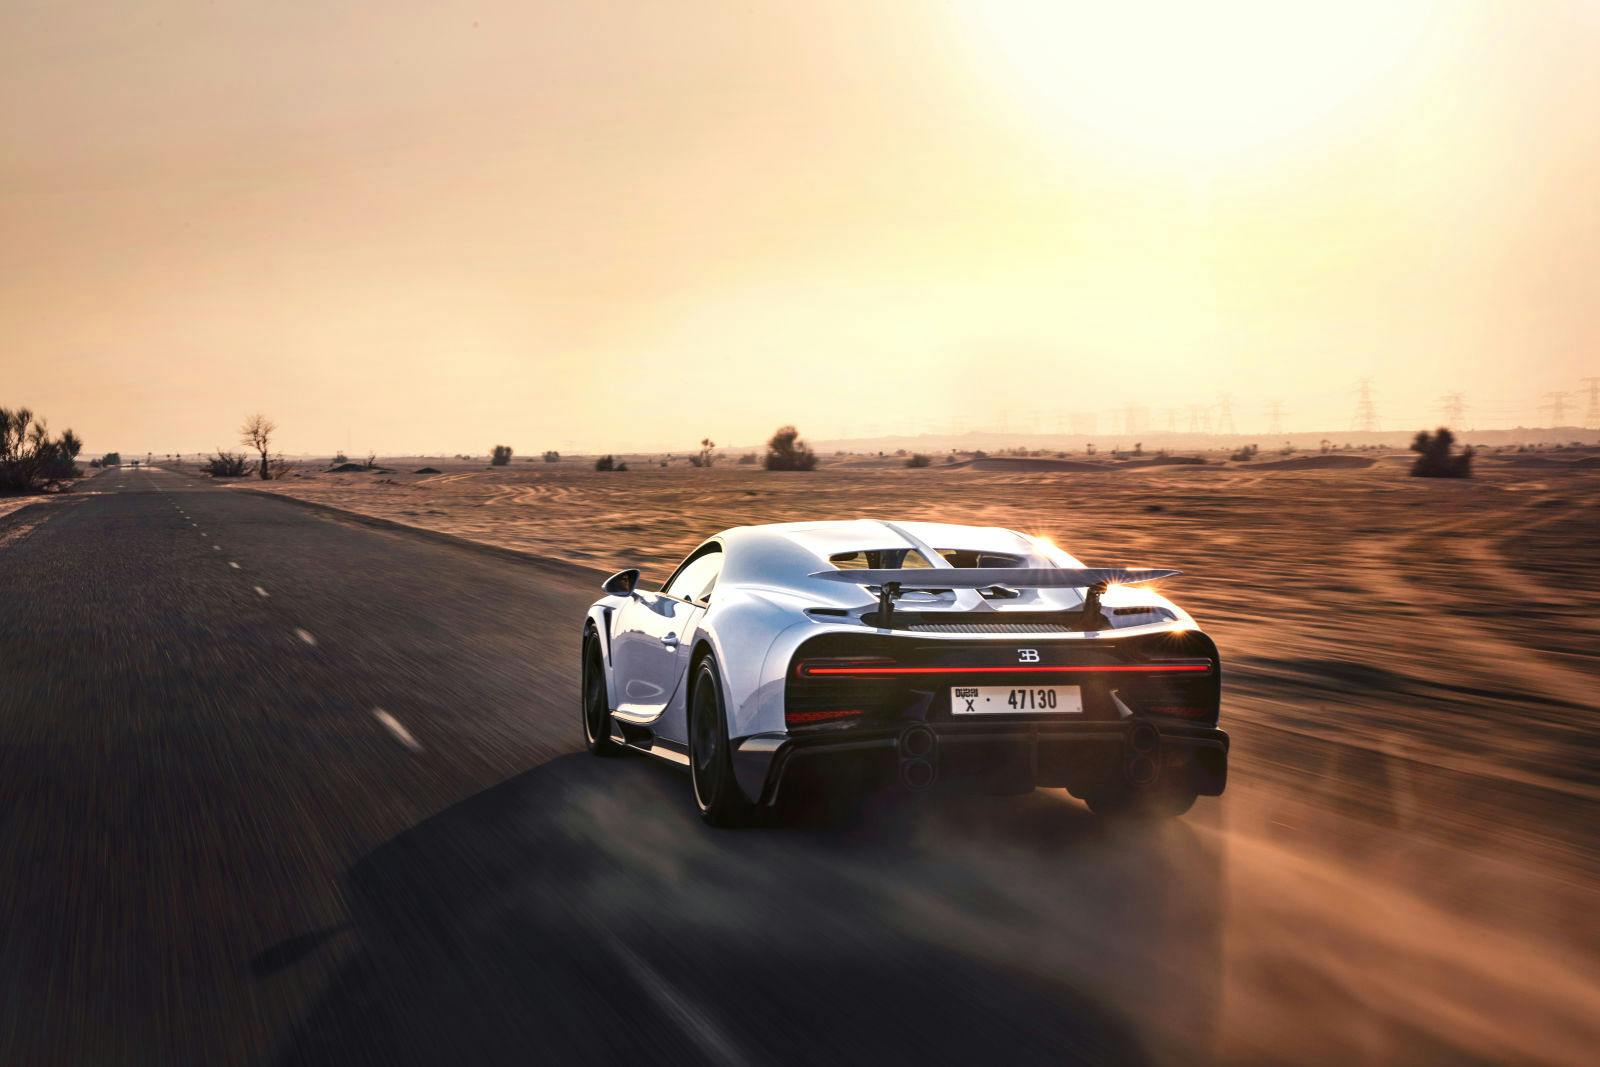 The Chiron Super Sport makes its first stop in Dubai in the United Arab Emirates, before it continues its Middle East tour.